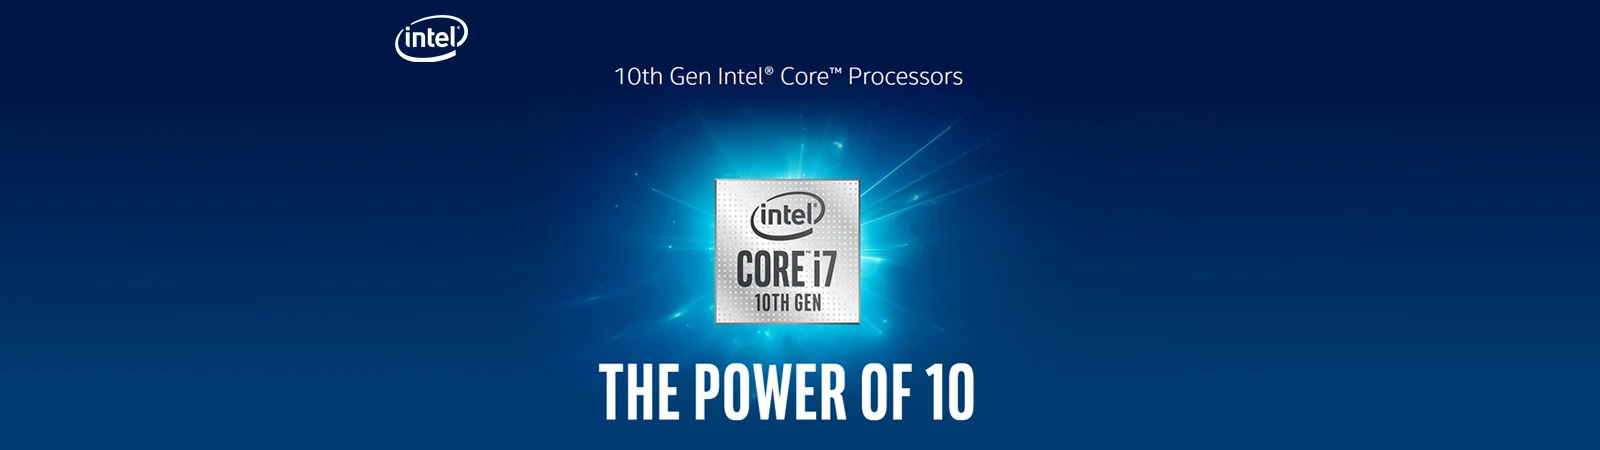 intel banner imagine what you can do